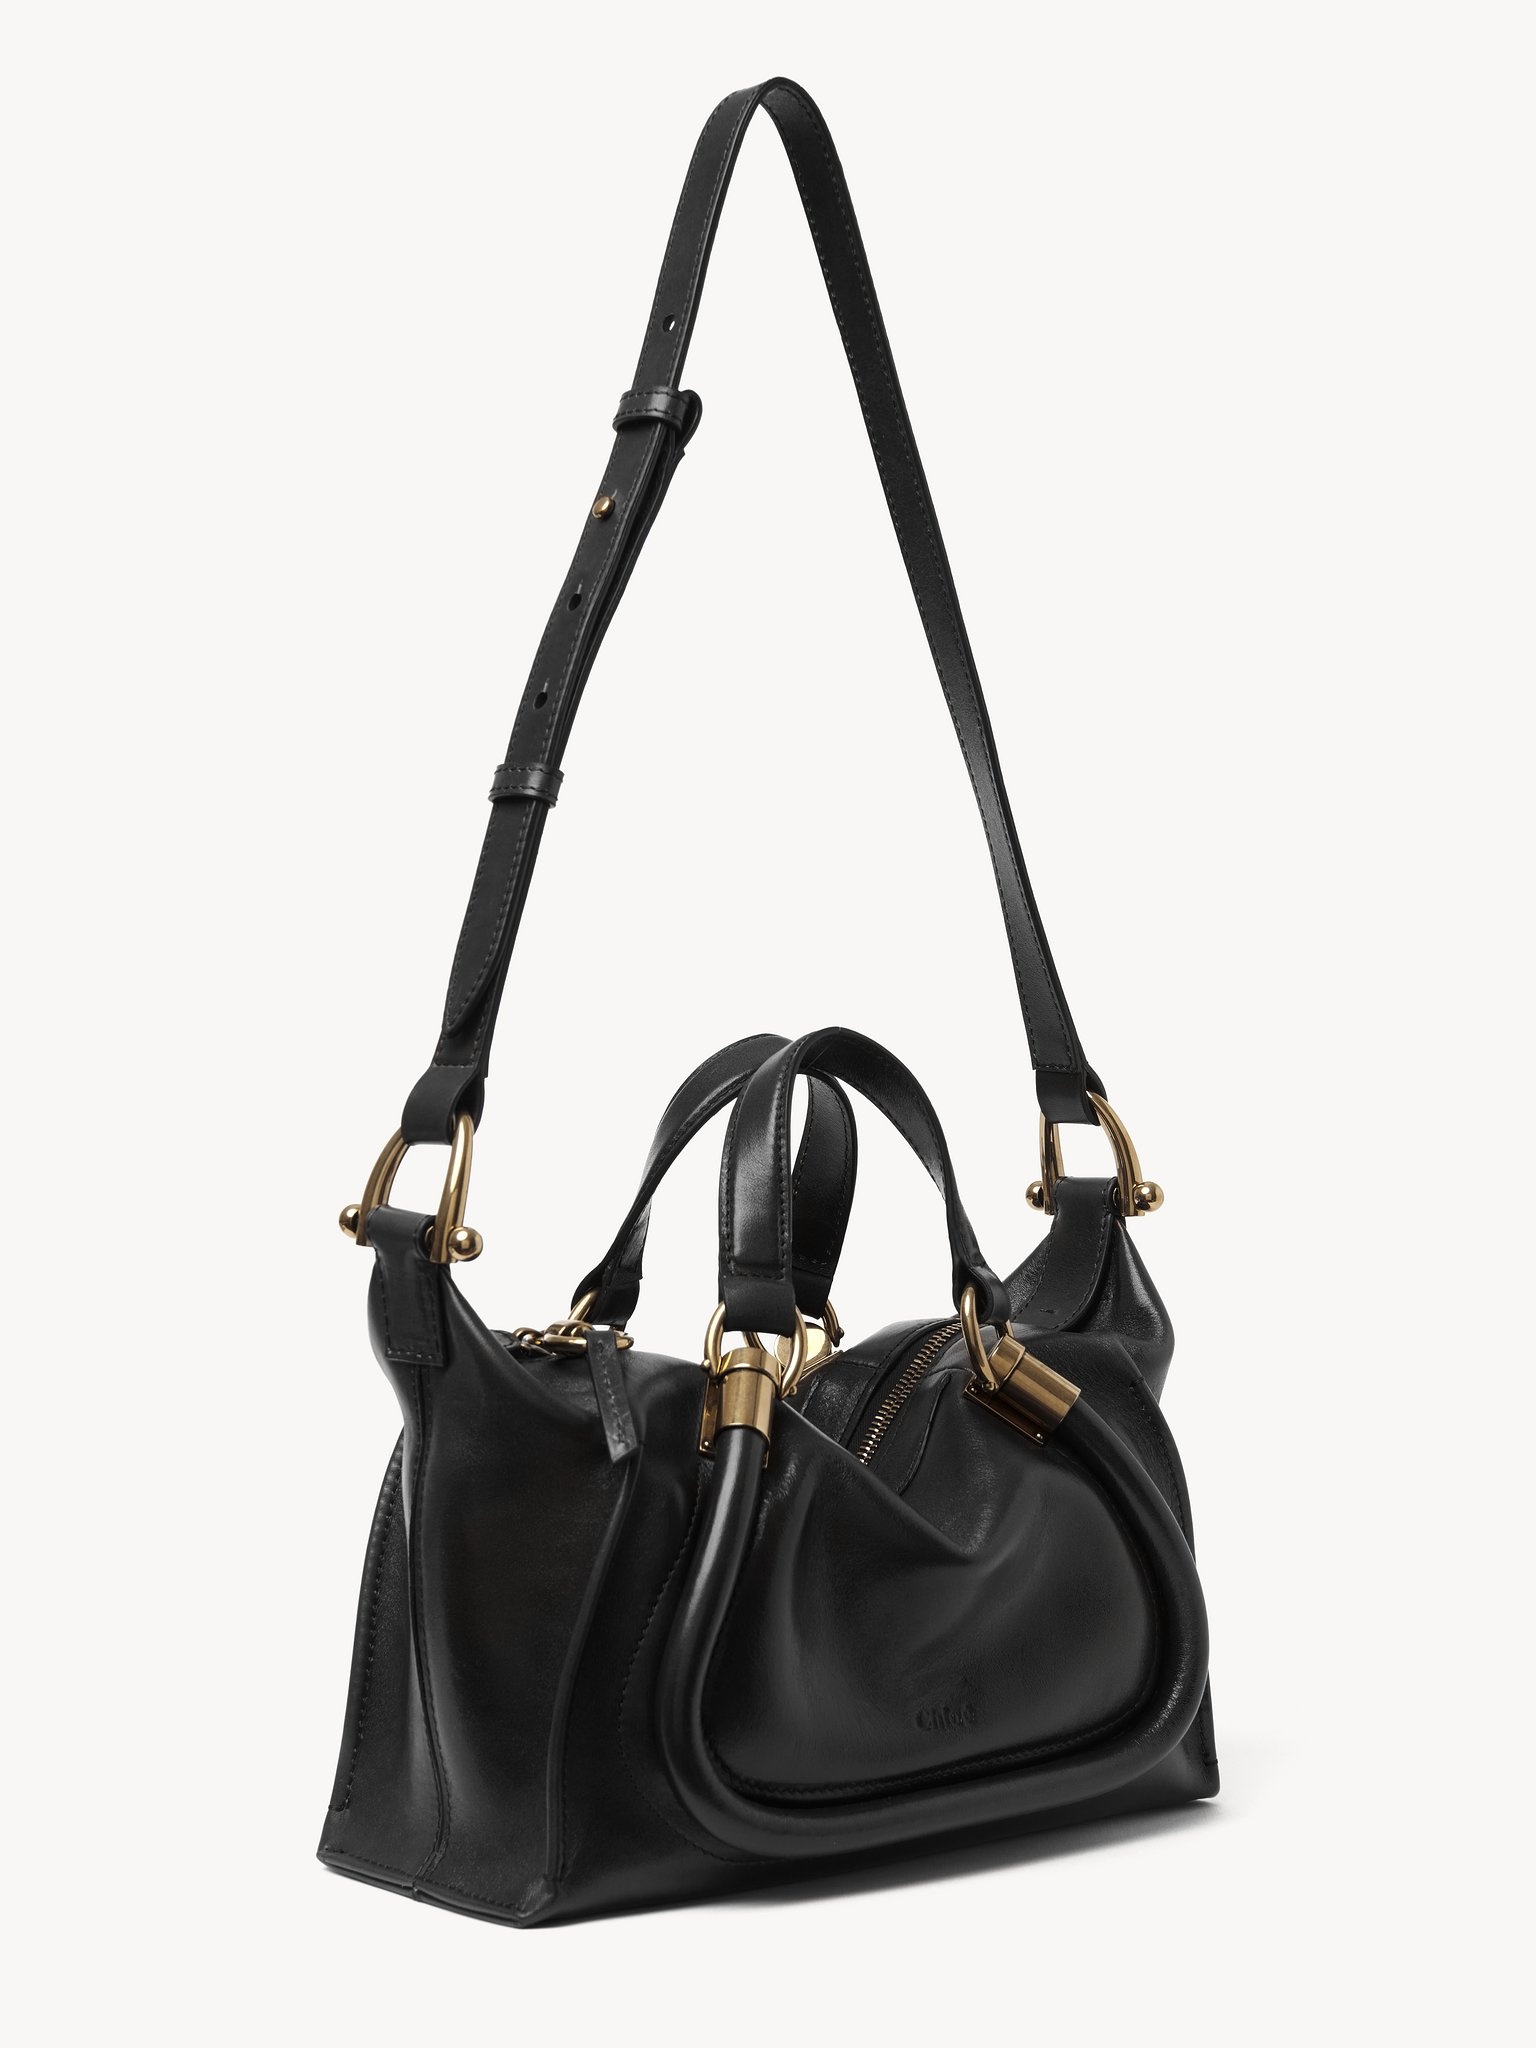 SMALL PARATY 24 BAG IN SOFT LEATHER - 2